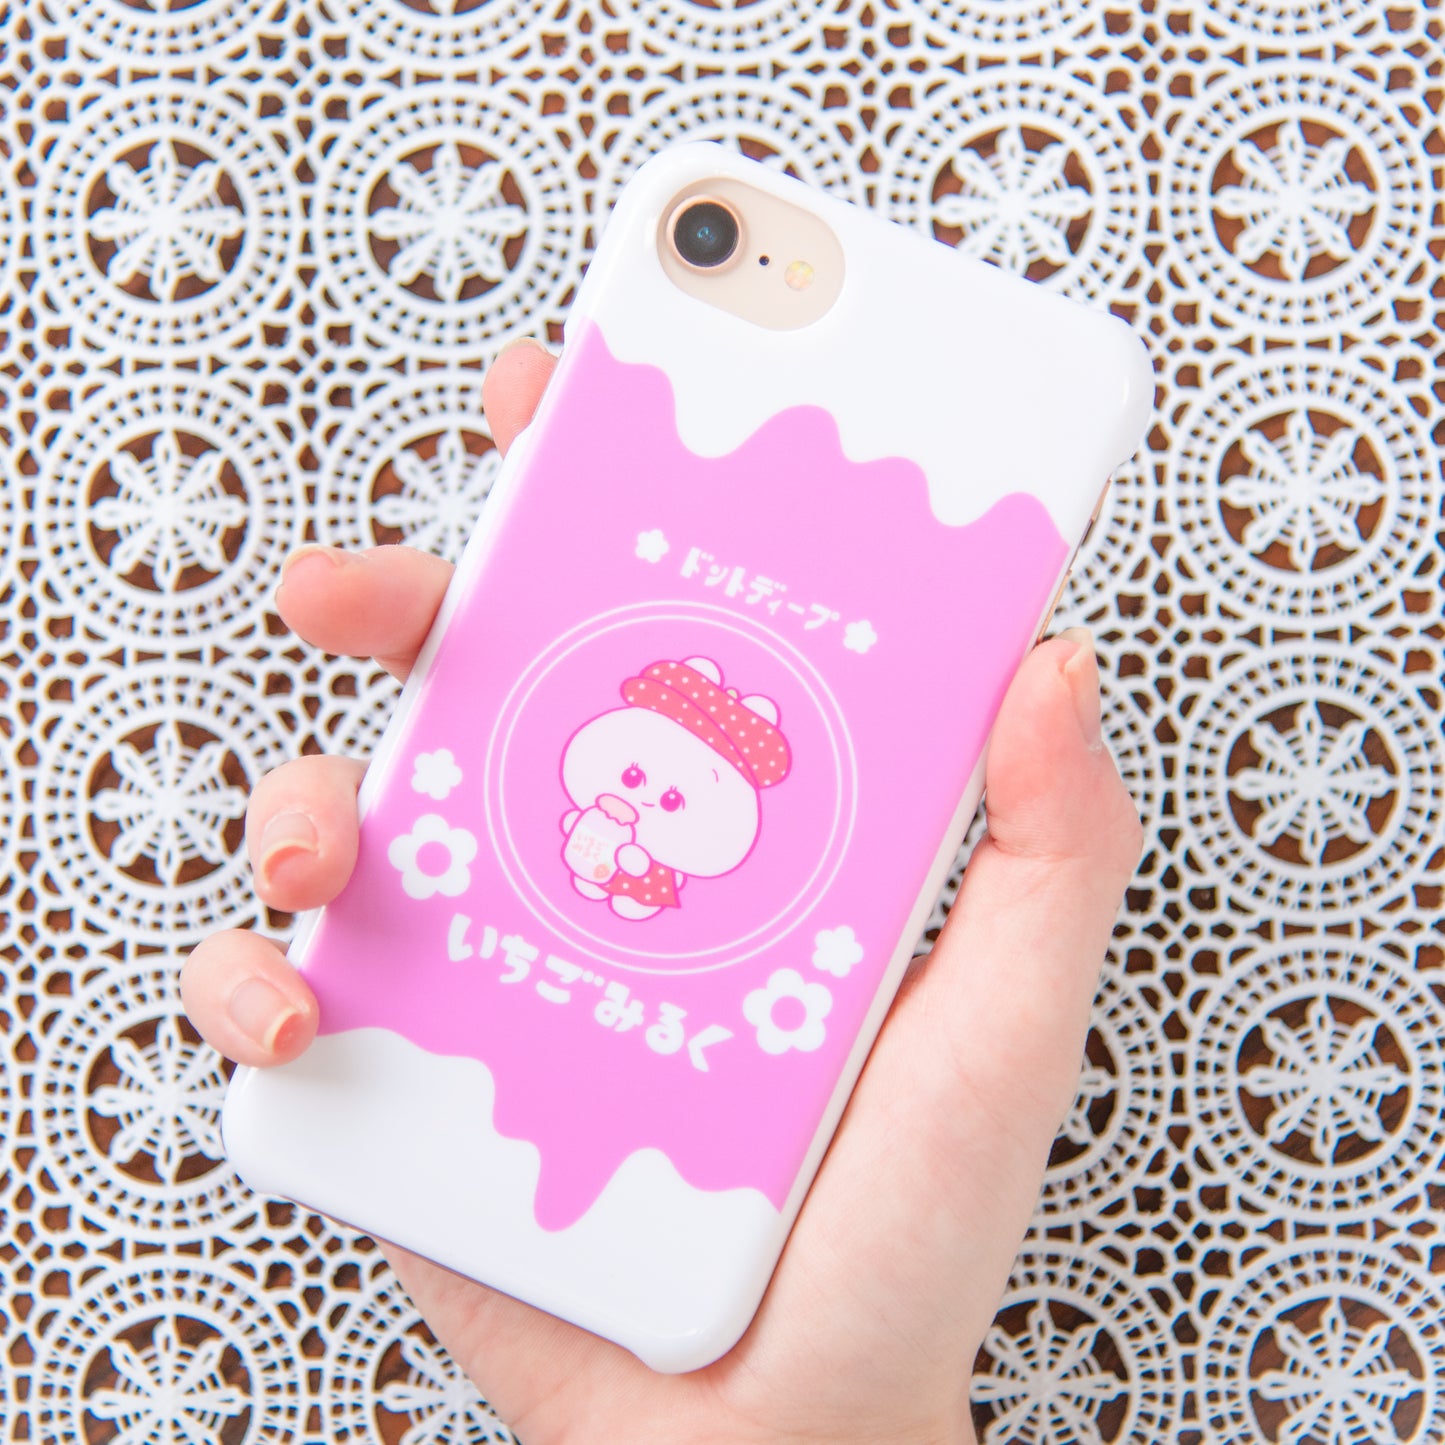 [Asamimi-chan] Smartphone case compatible with almost all models (Ichigo Milk) Rakuten Mobile series [Made to order]